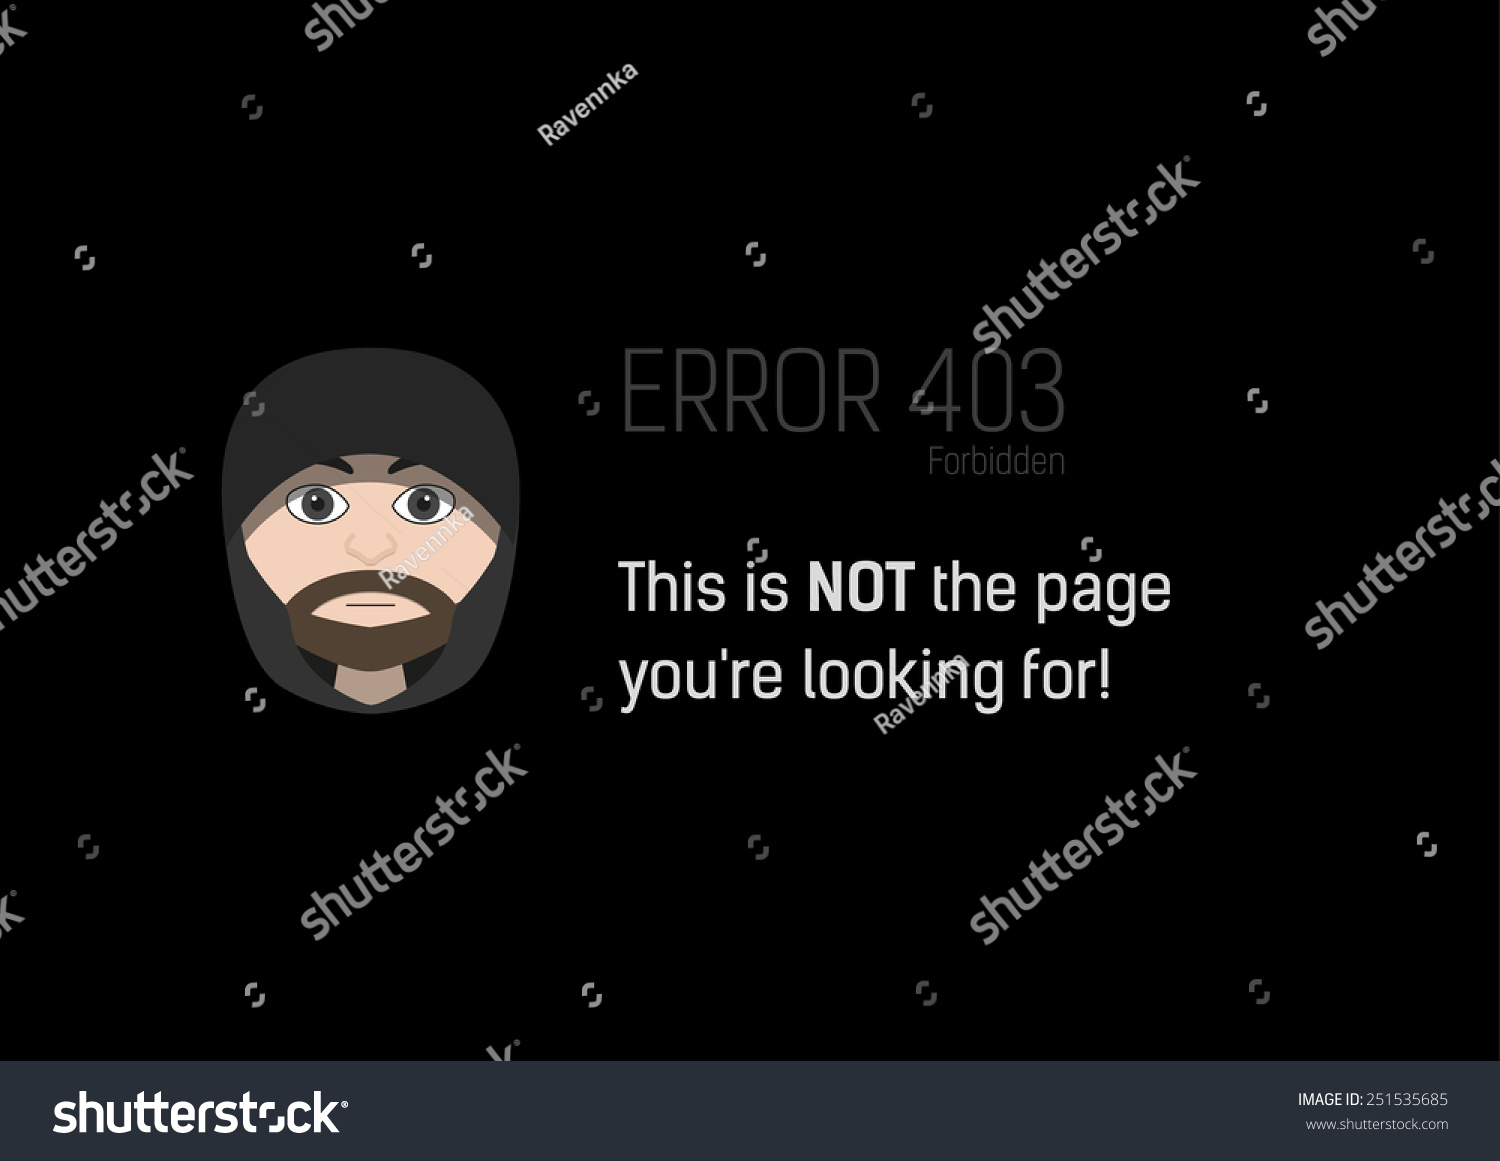 SVG of Stylized Error 403 - Forbidden with man in hood and text with modern culture overlap - This is not the page you're looking for! svg